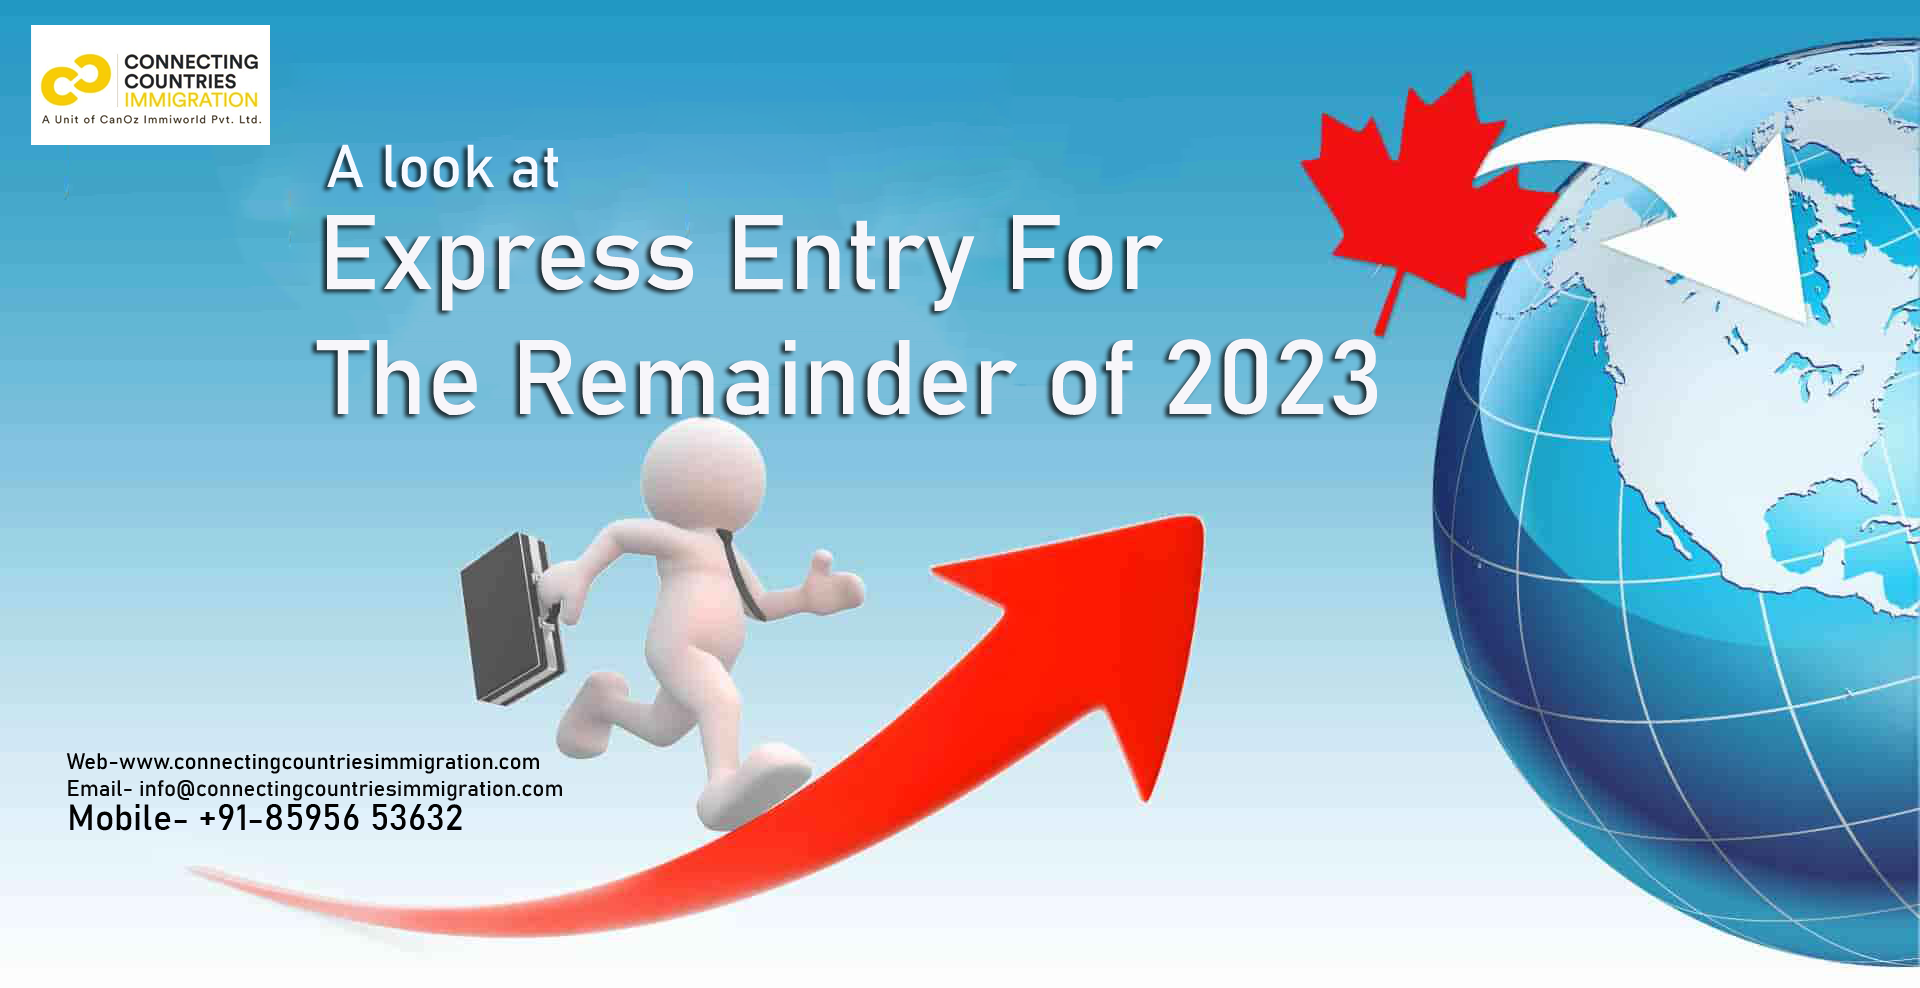 Express Entry For The Remainder of 2023